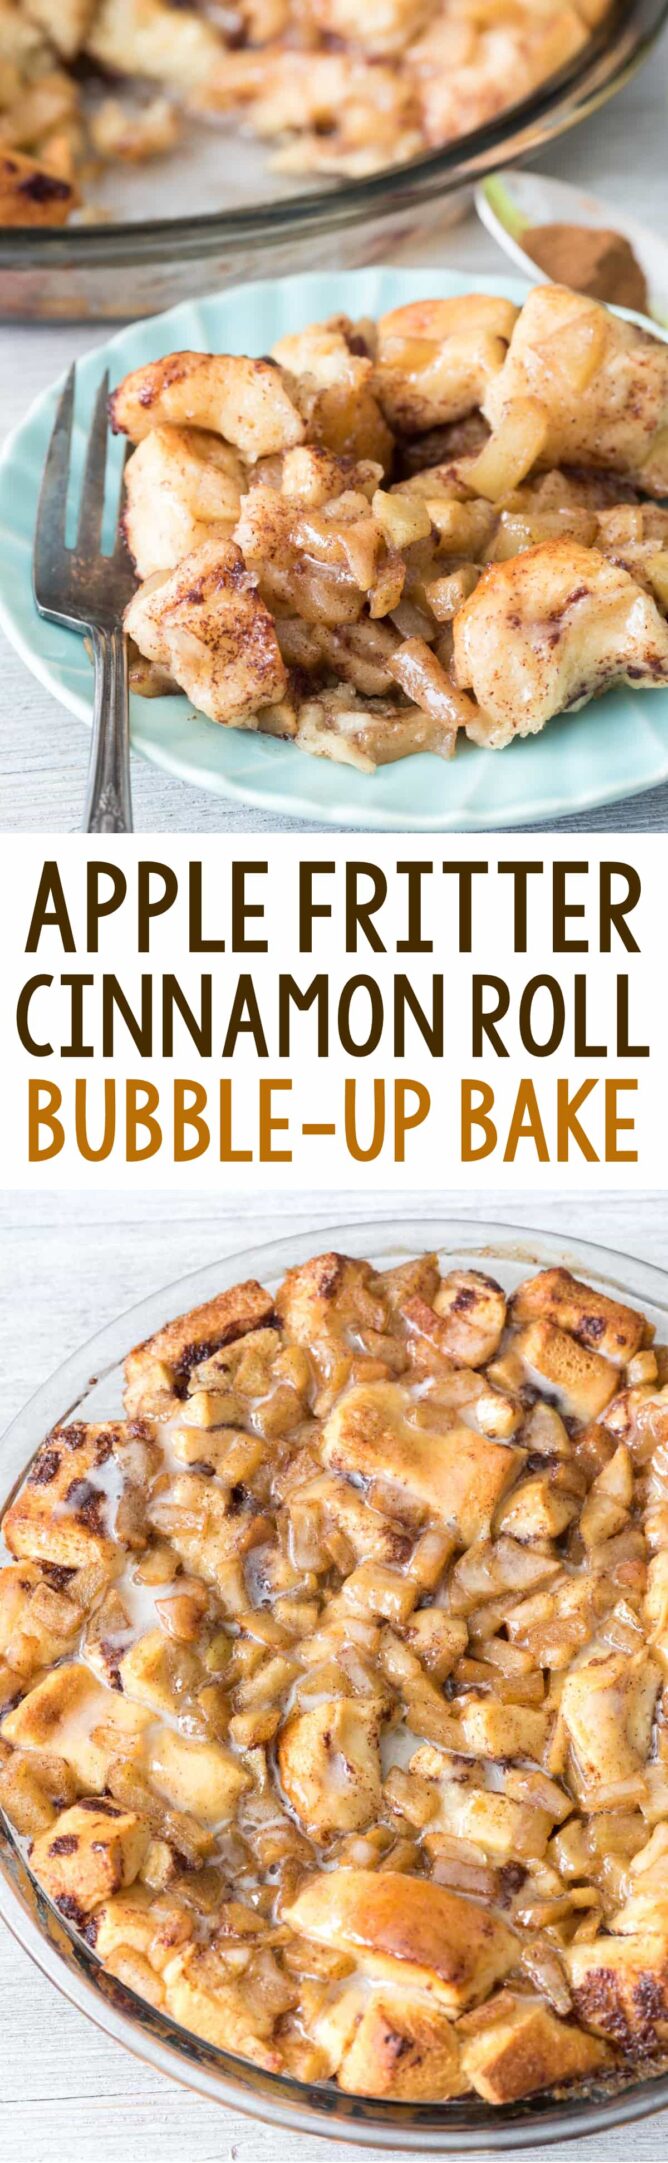 Apple fritter cinnamon roll bake photo collage with text in the middle